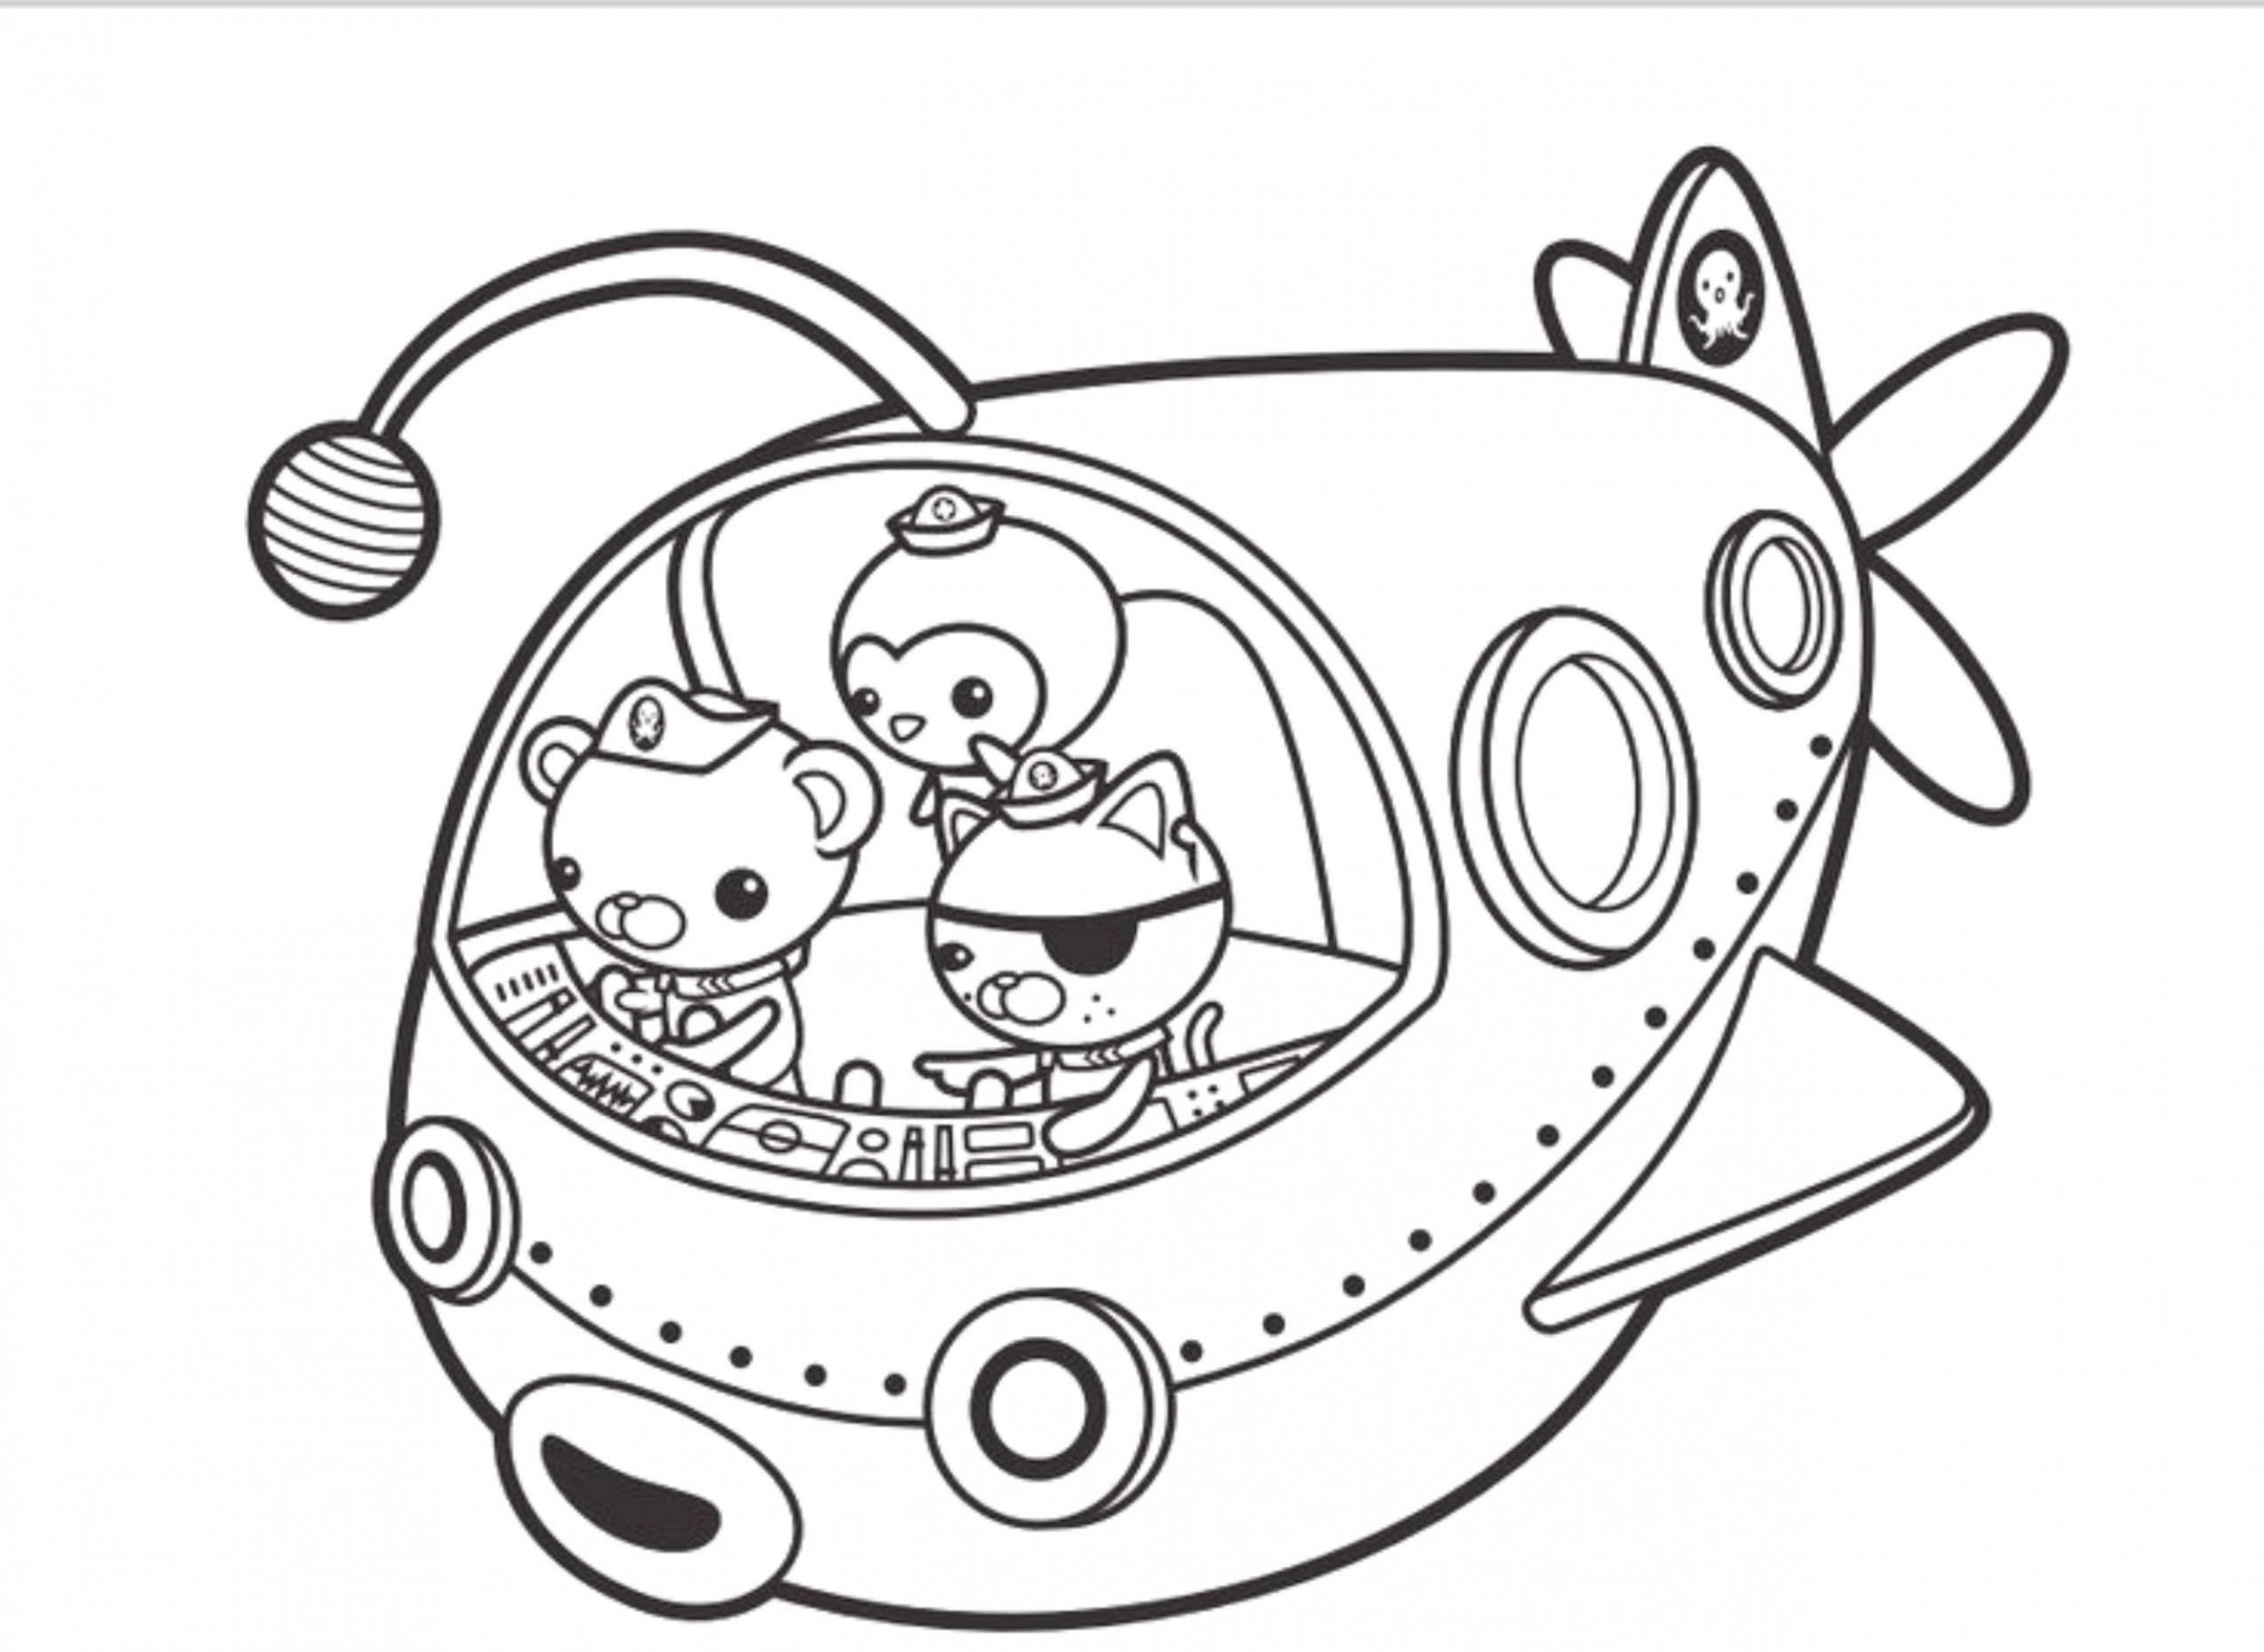 octonauts-coloring-pages-free-at-getcolorings-free-printable-colorings-pages-to-print-and